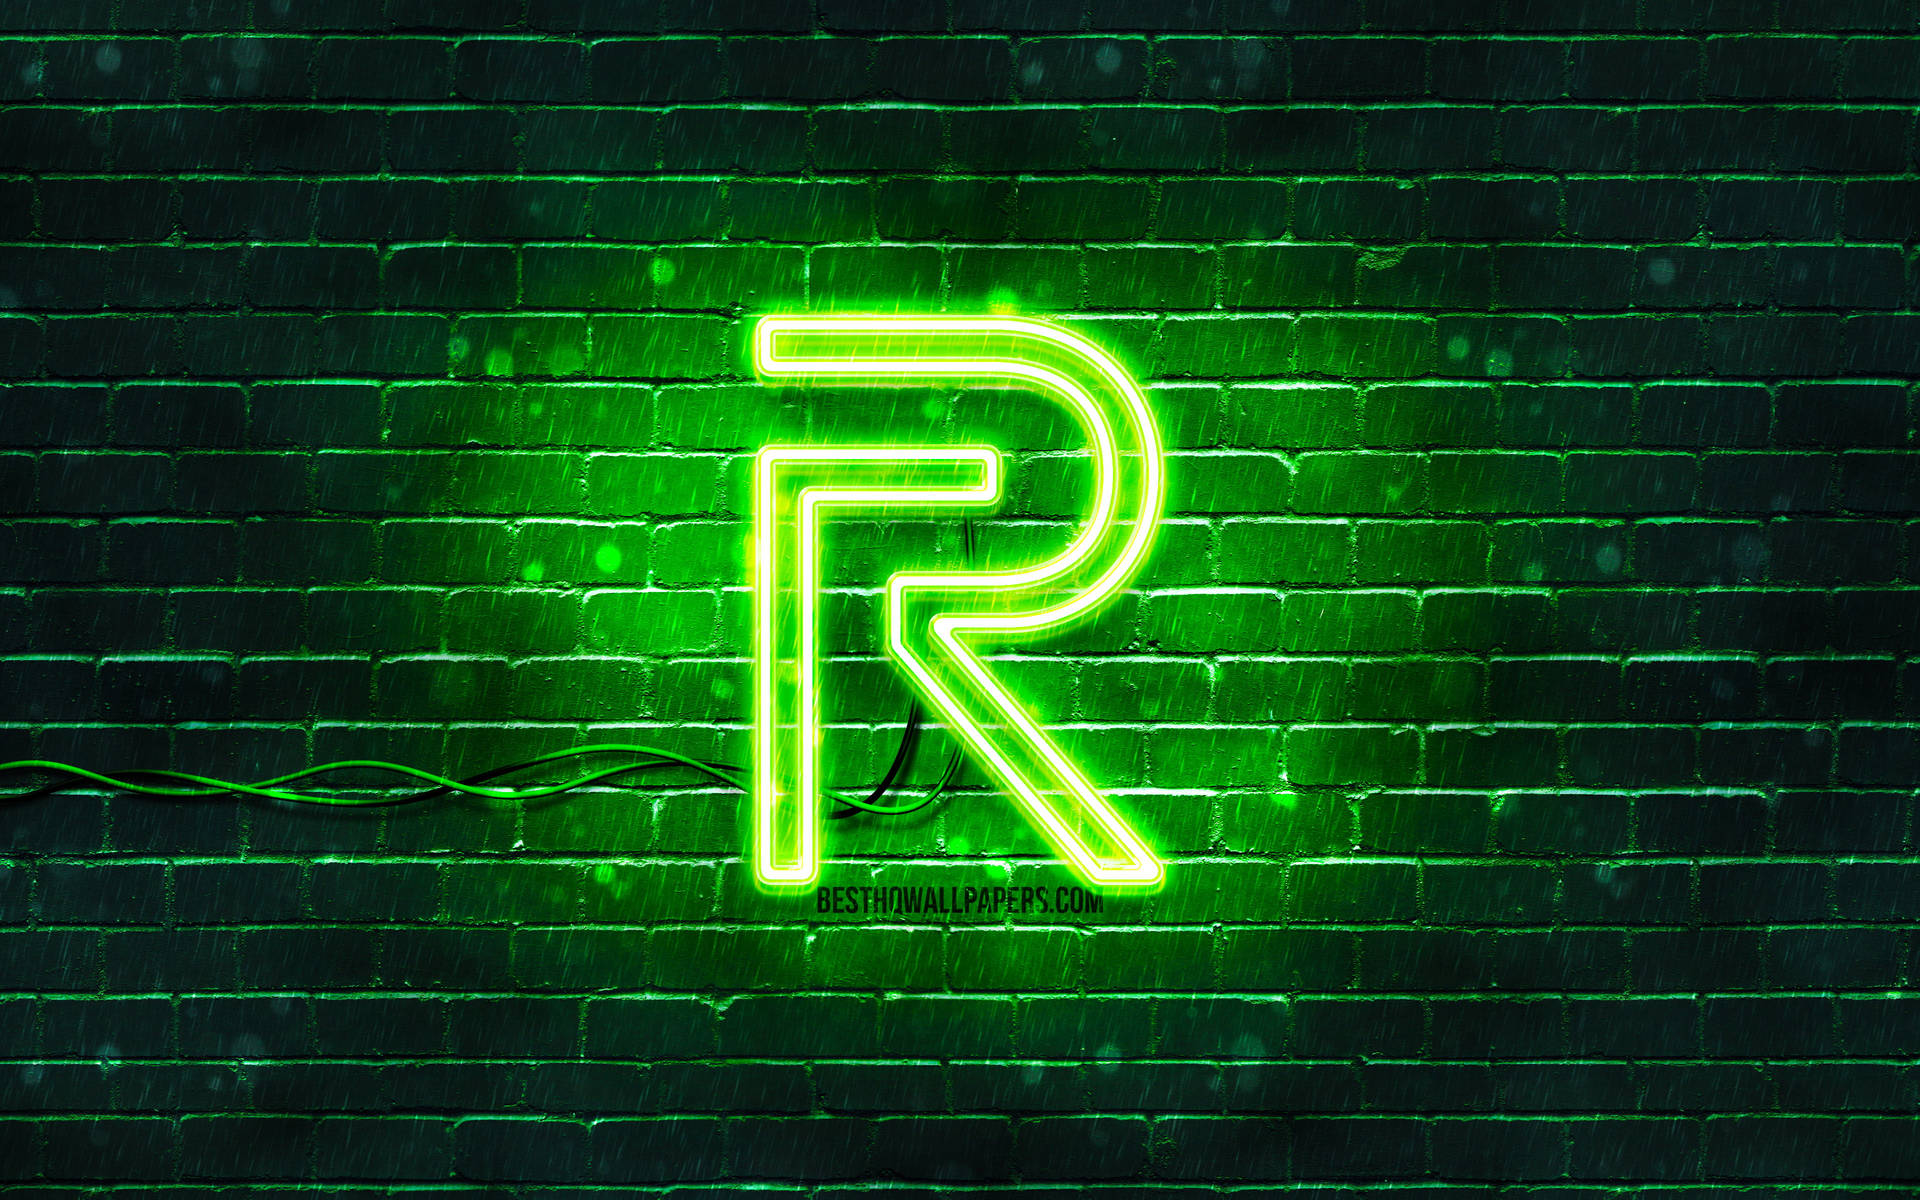 Free Neon Wallpaper Downloads, [600+] Neon Wallpapers for FREE | Wallpapers .com